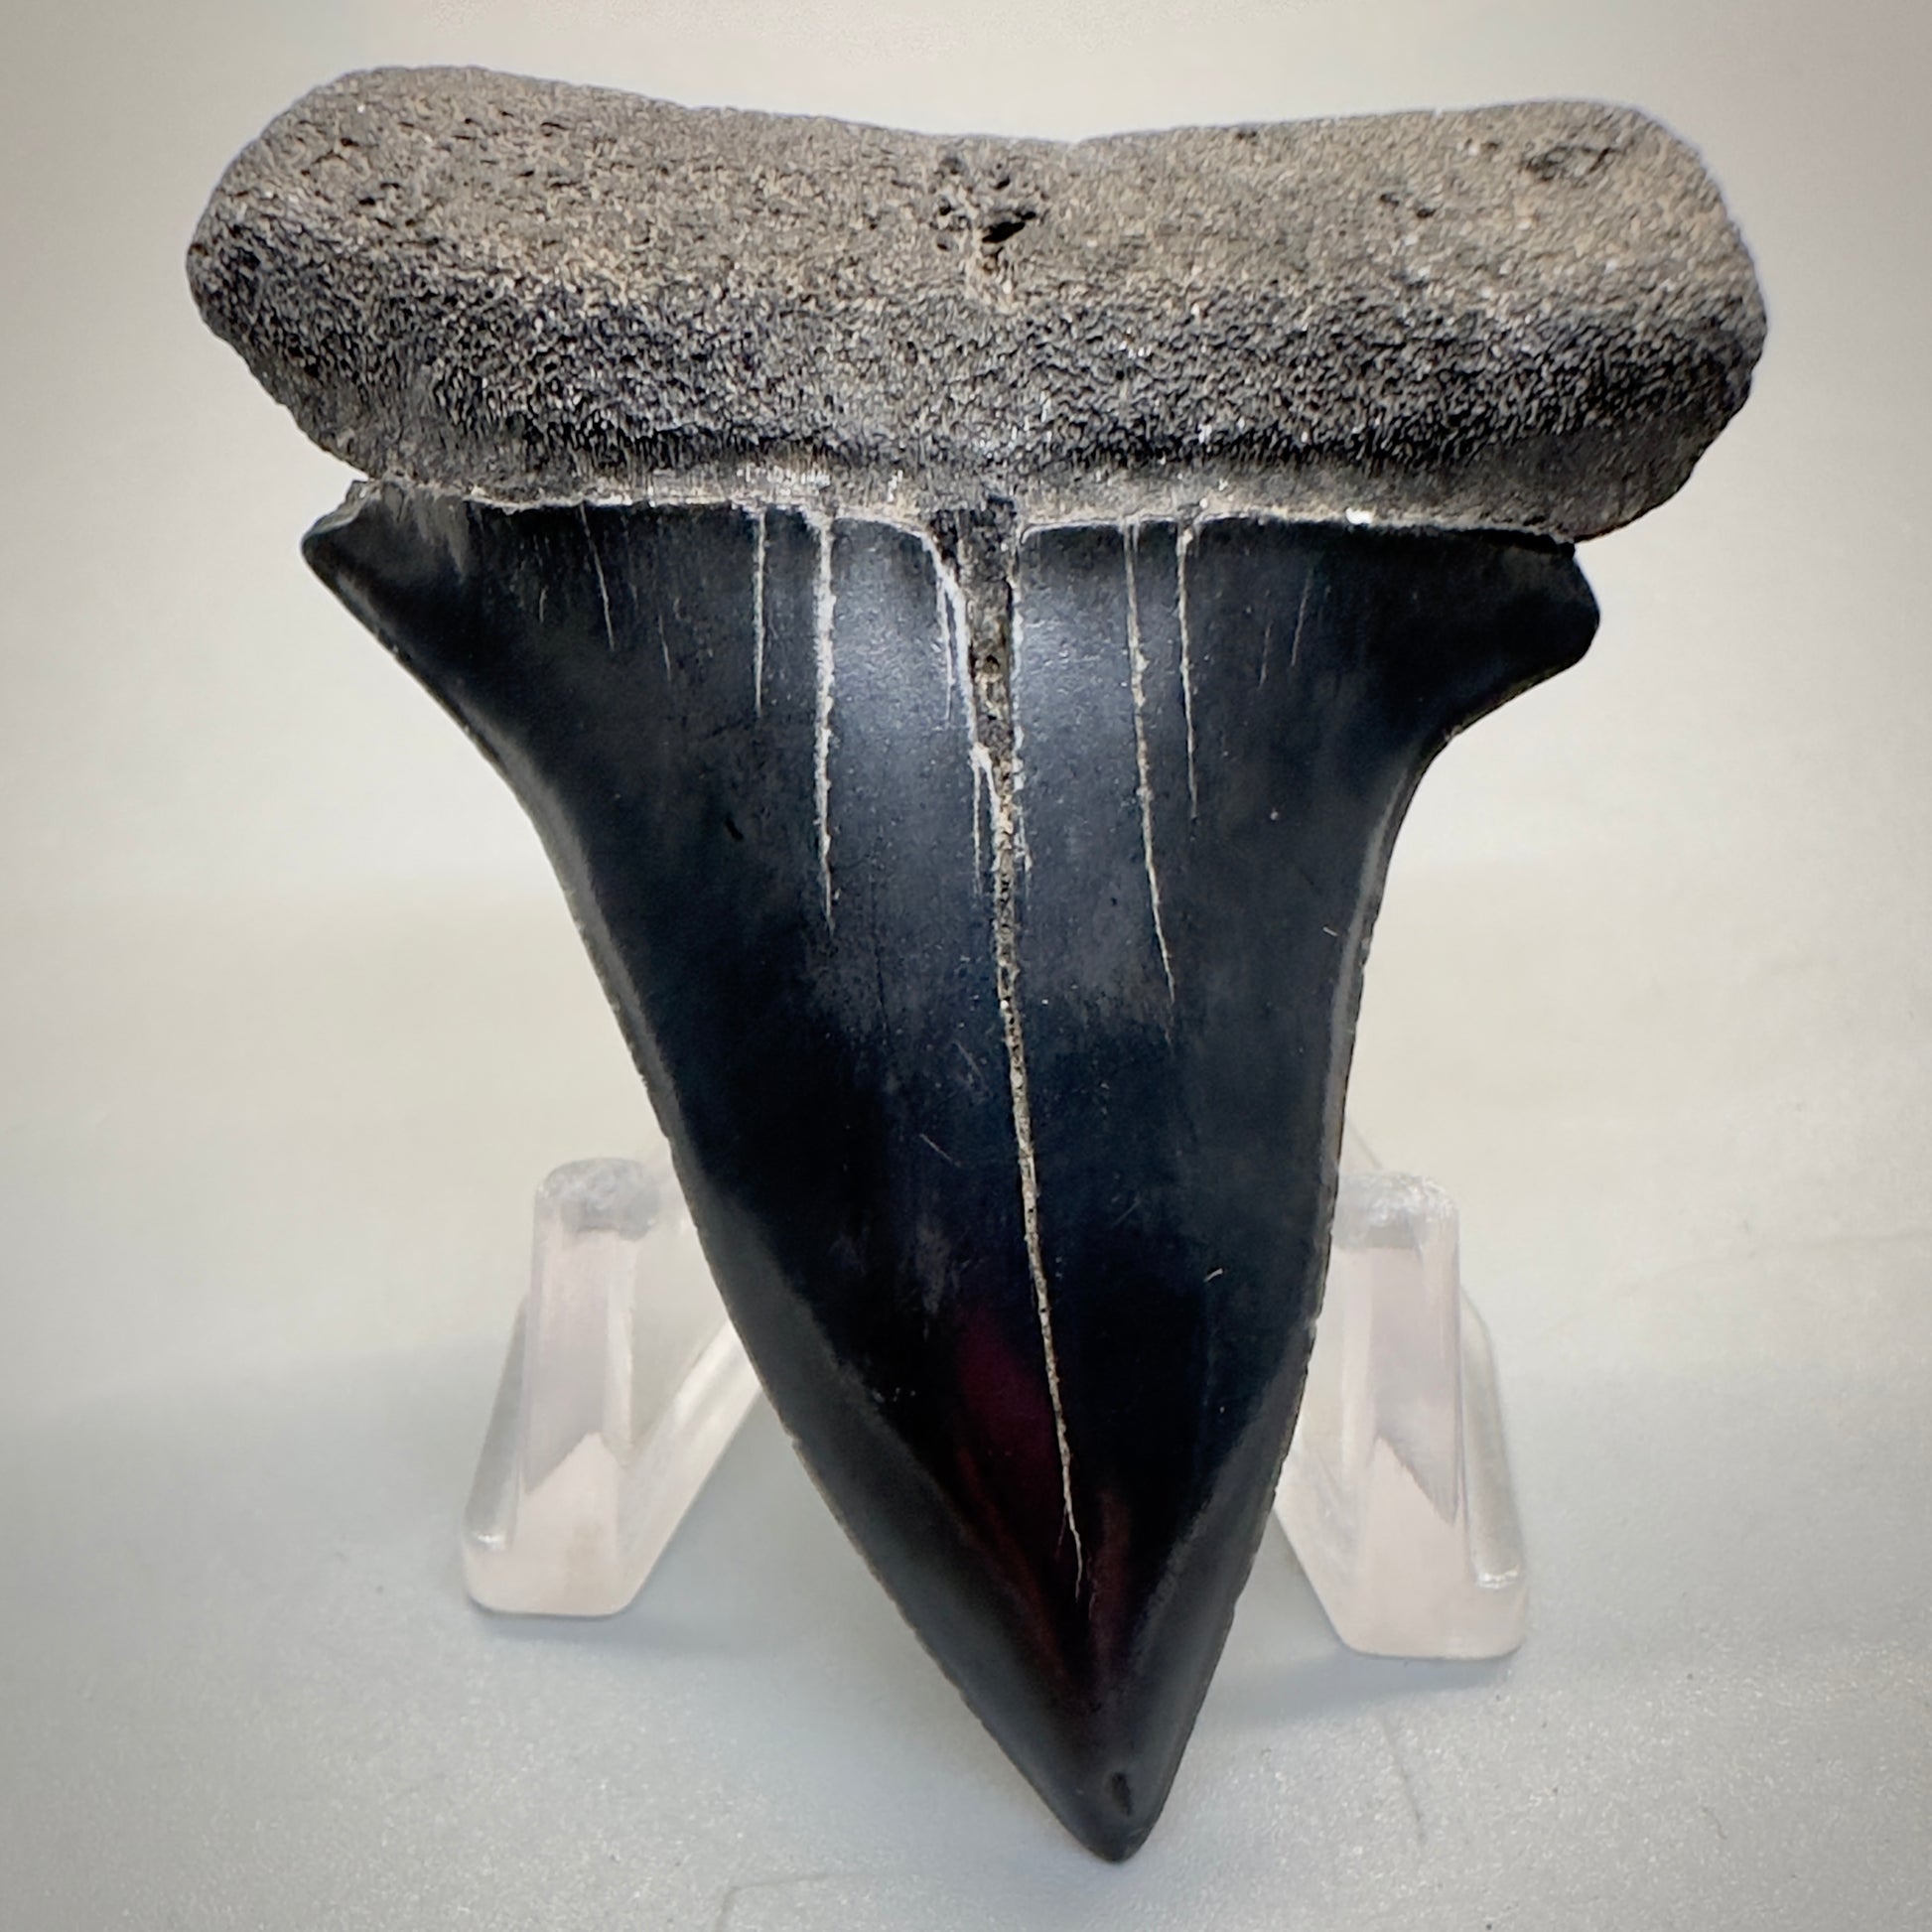 Dark colors 2.50 inches Extinct Mako - isurus hastalis shark tooth from southeast, USA M515 front down